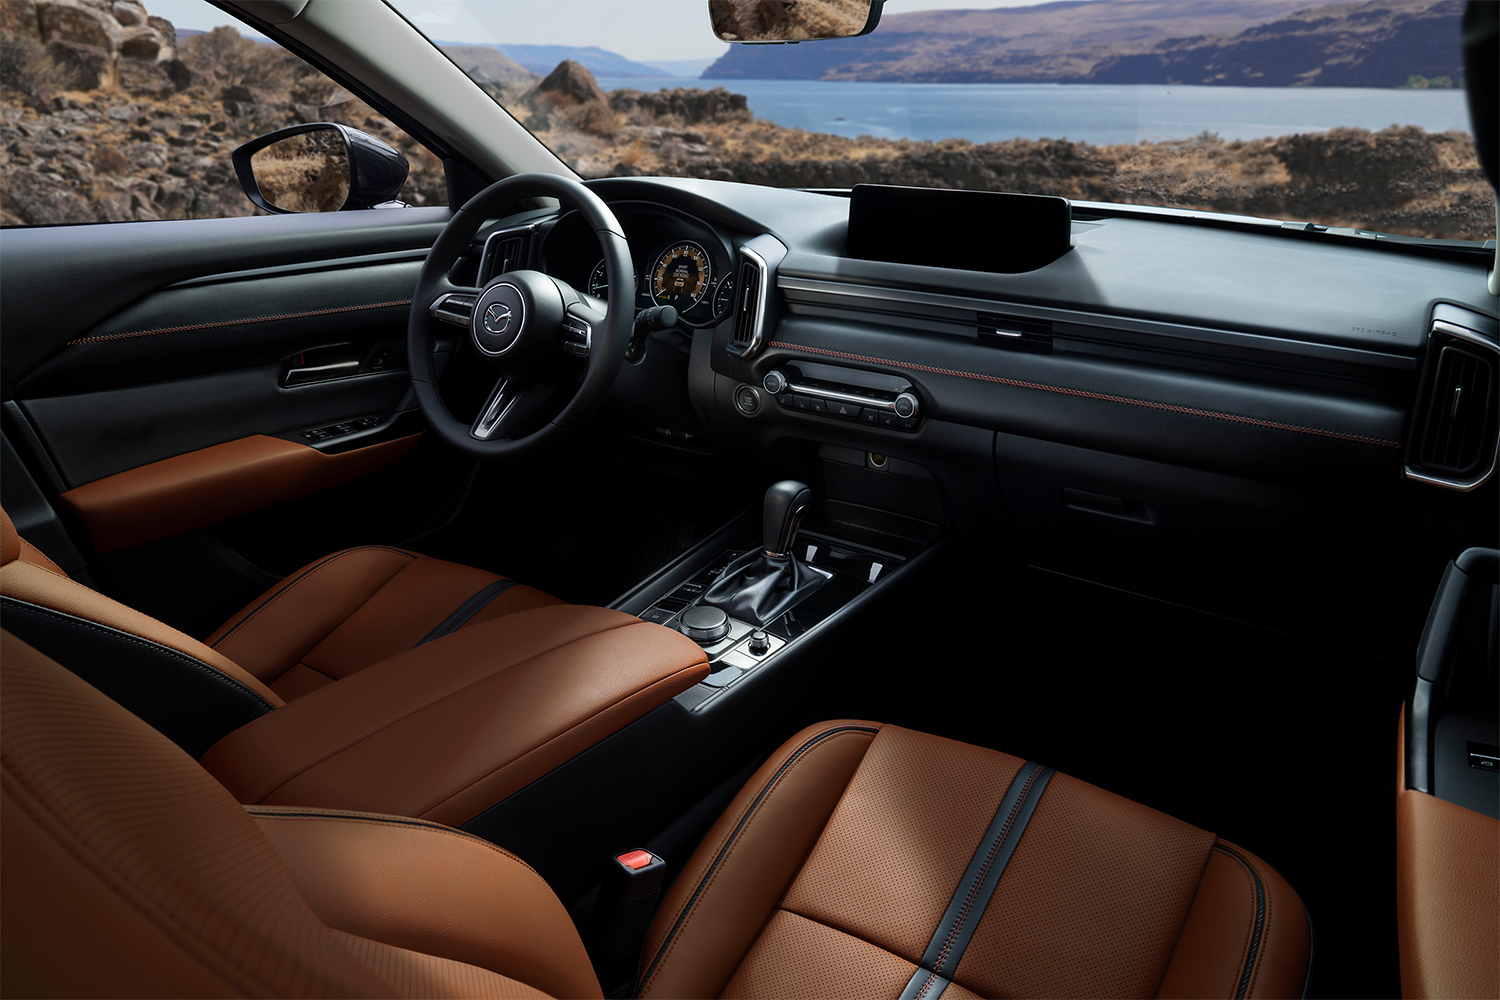 The interior of the Mazda CX-50 SUV, with brown seats and a digital display